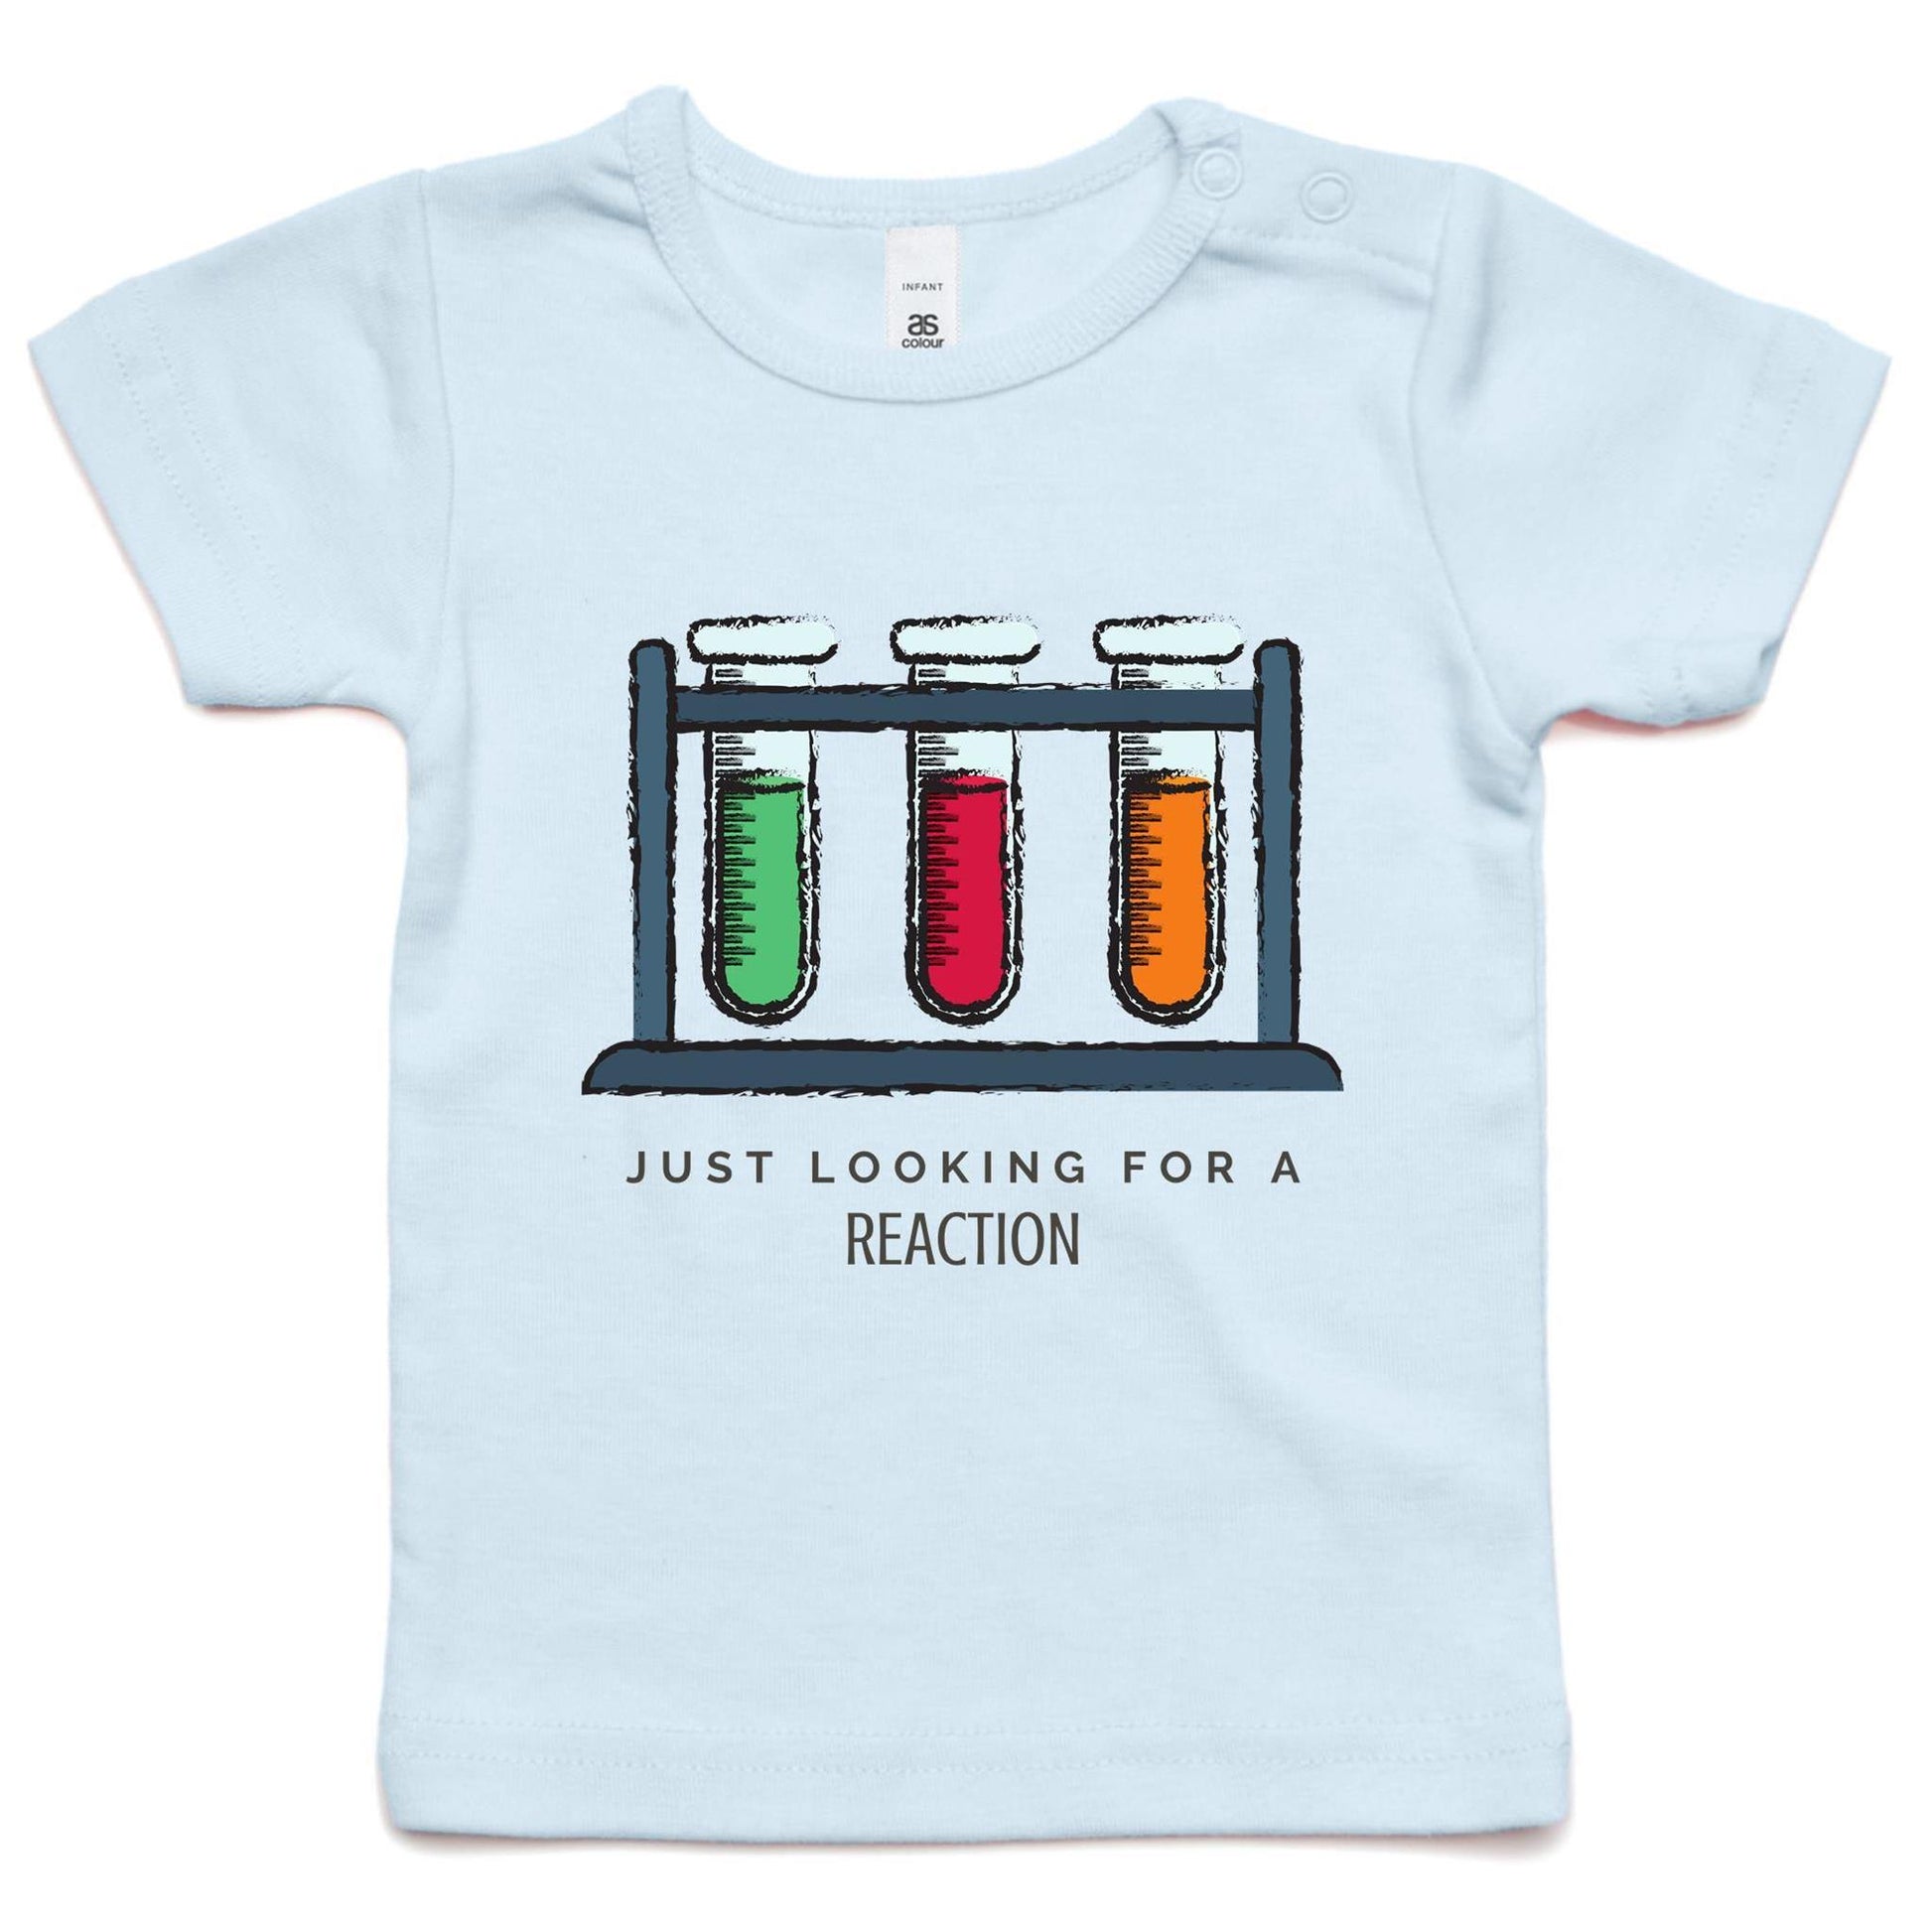 Test Tube, Just Looking For A Reaction - Baby T-shirt Powder Blue Baby T-shirt kids Science